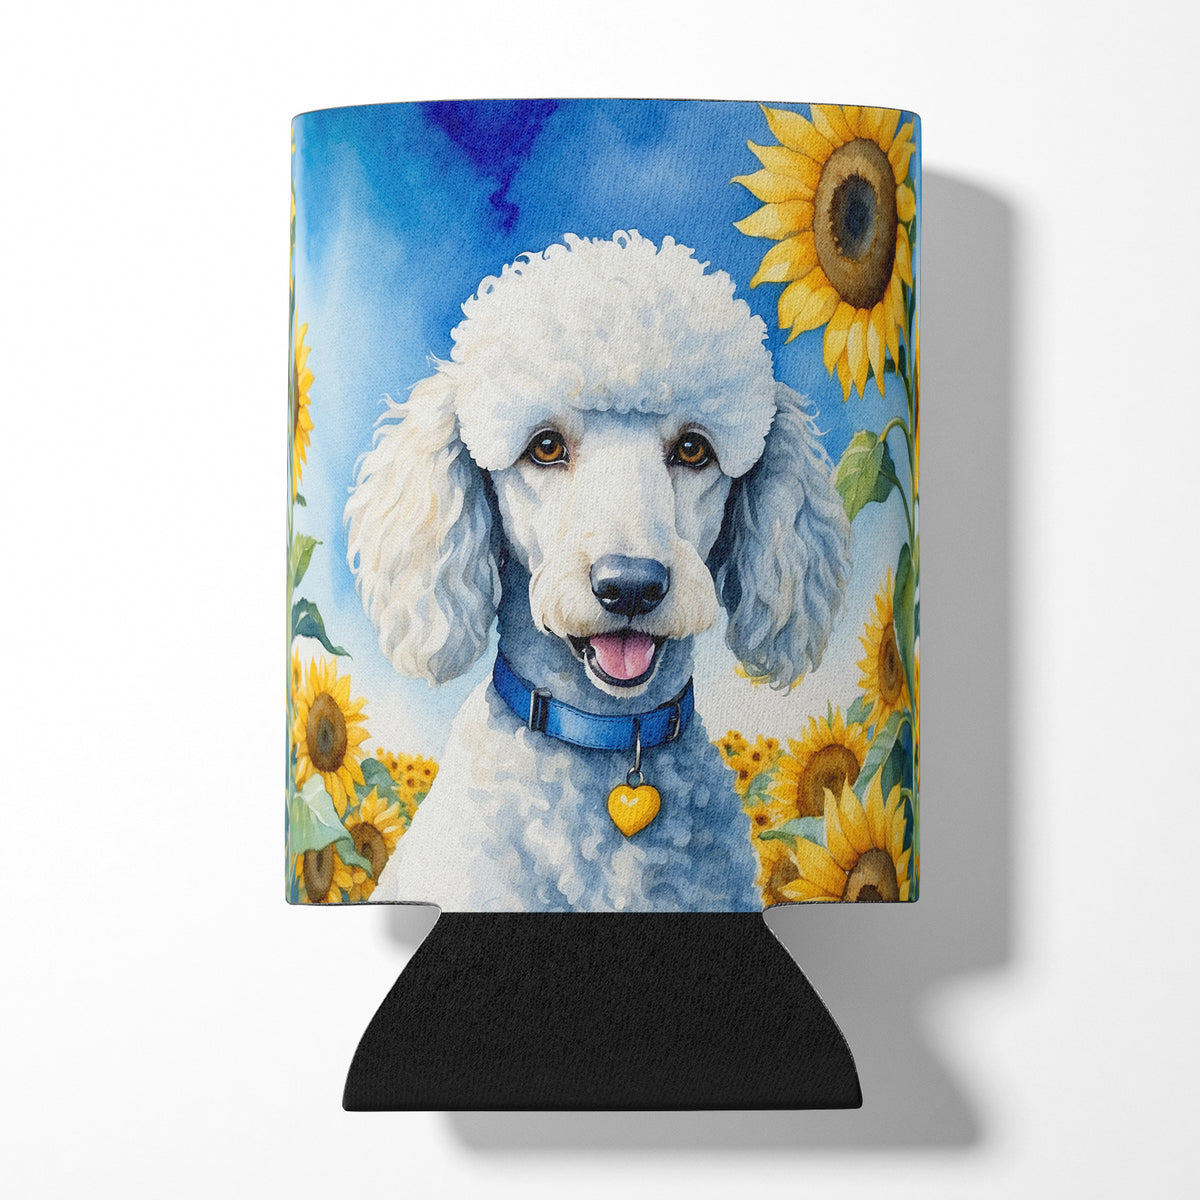 Buy this White Poodle in Sunflowers Can or Bottle Hugger